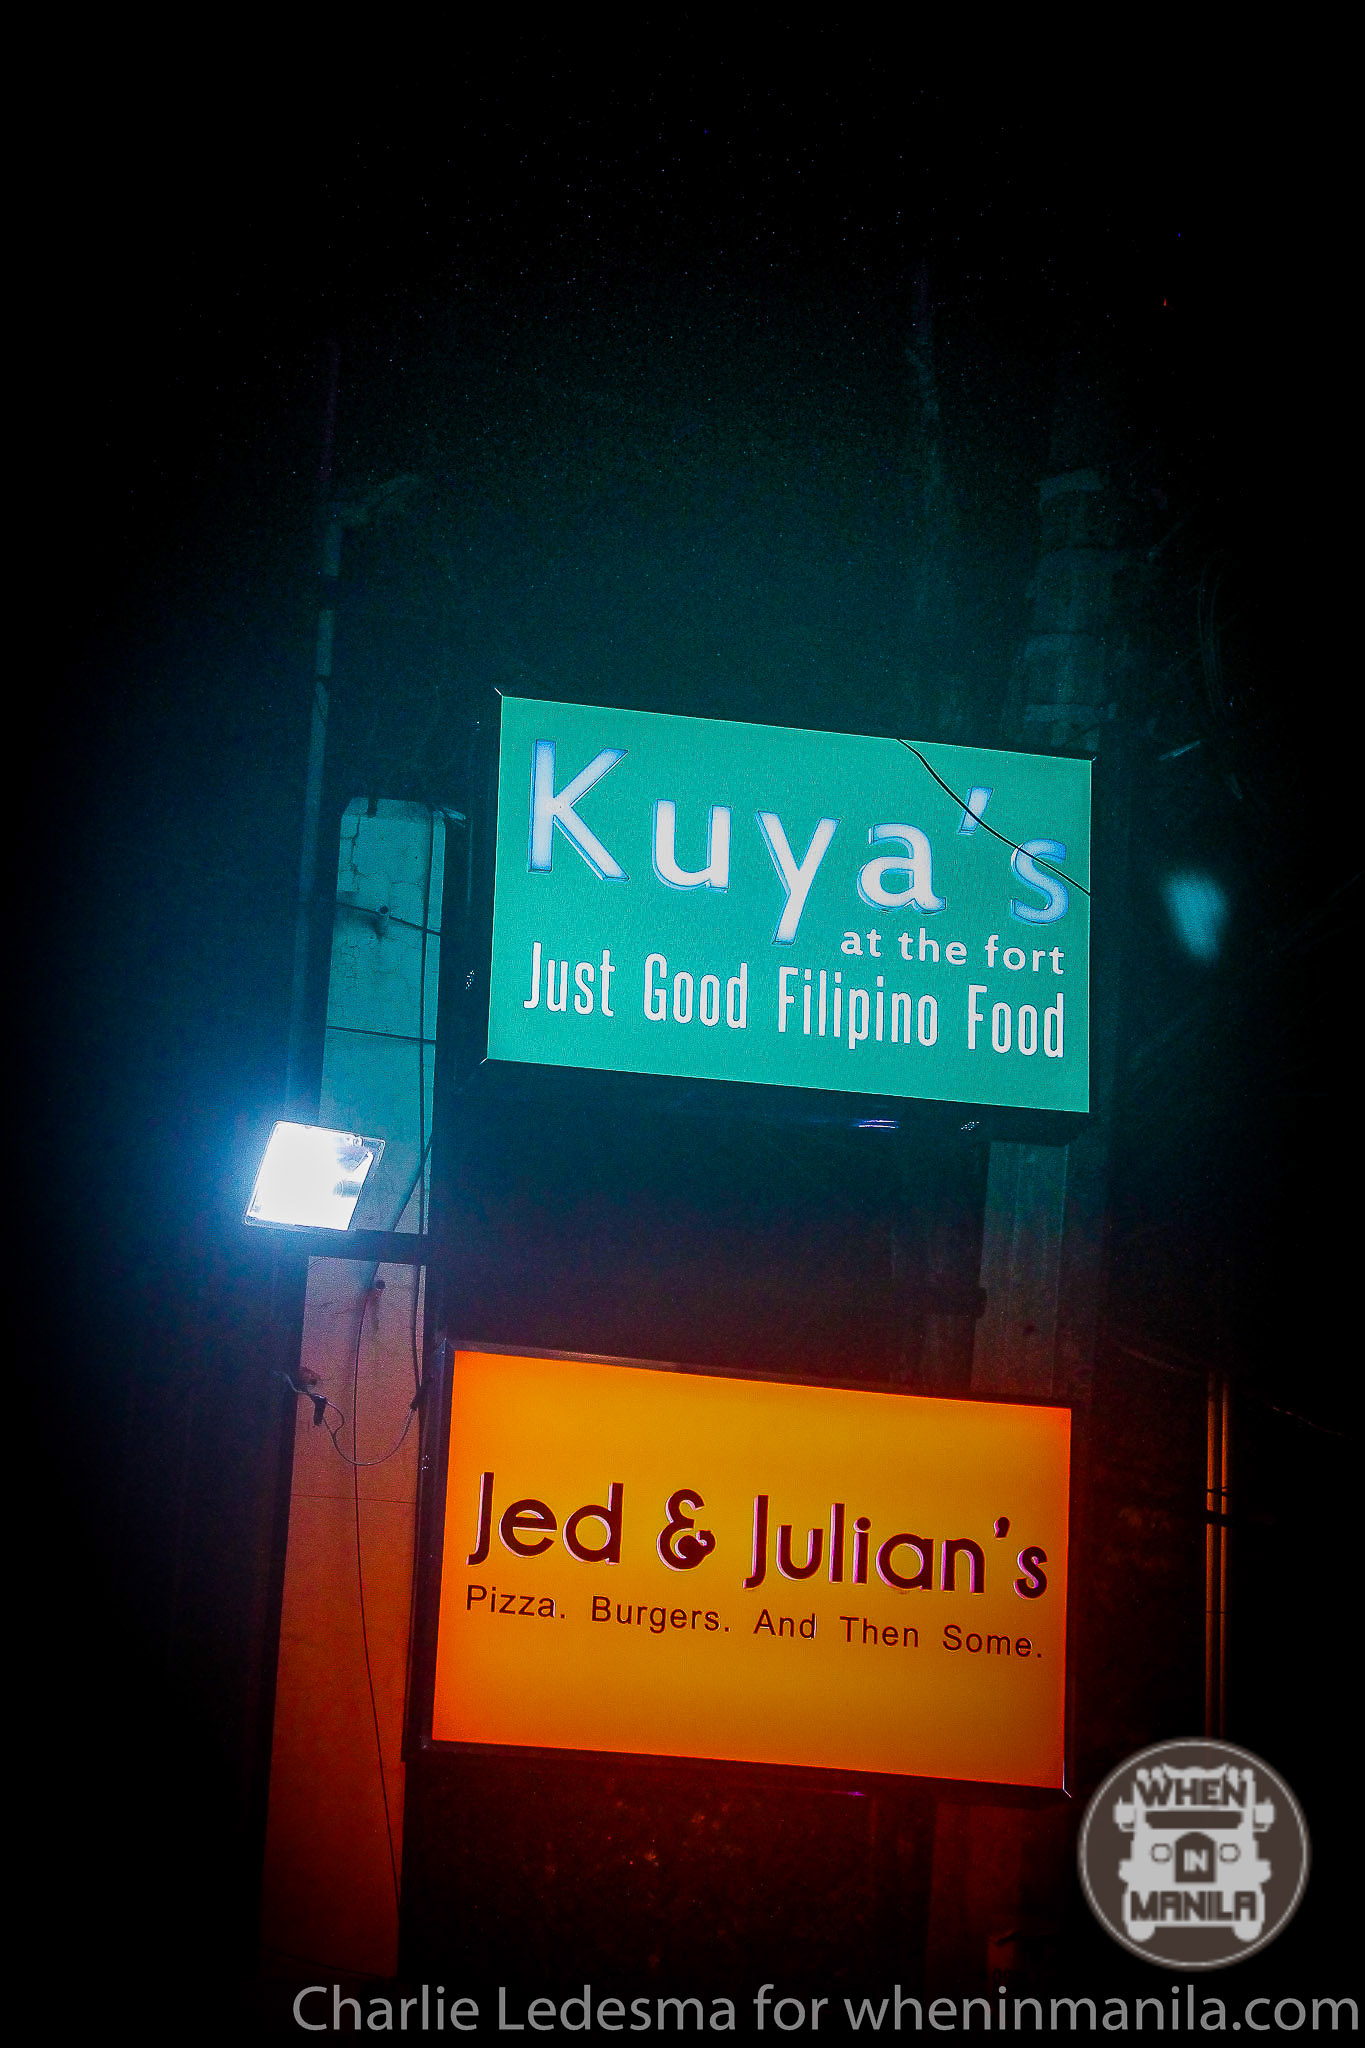 Kuya's at the Fort / Jed & Julian's